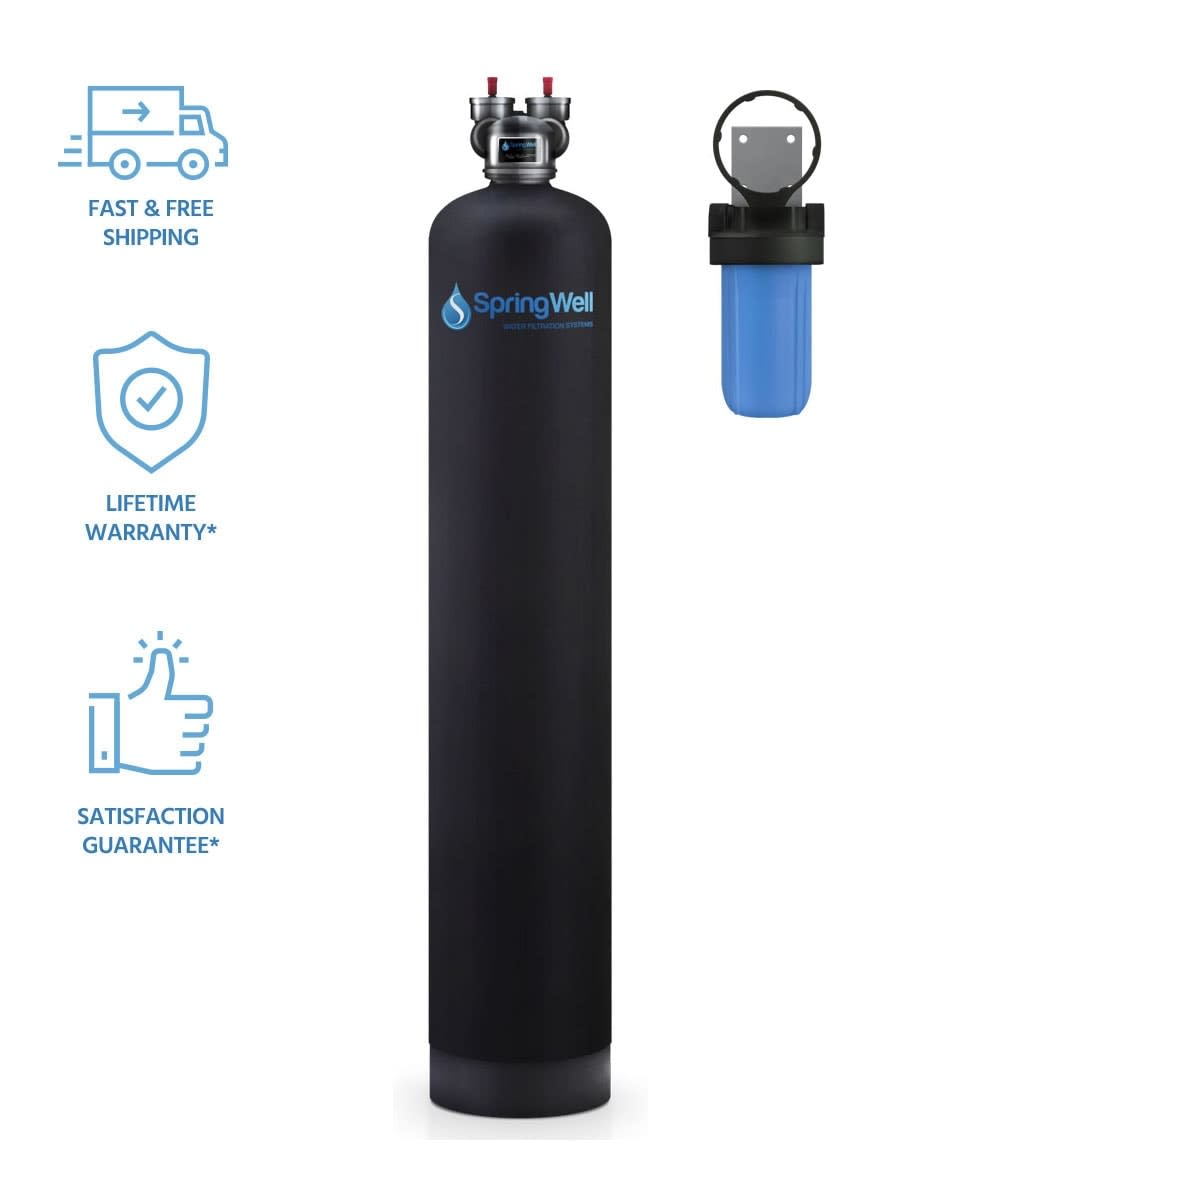 Whole House Water Filter System - SpringWell Water Filtration System